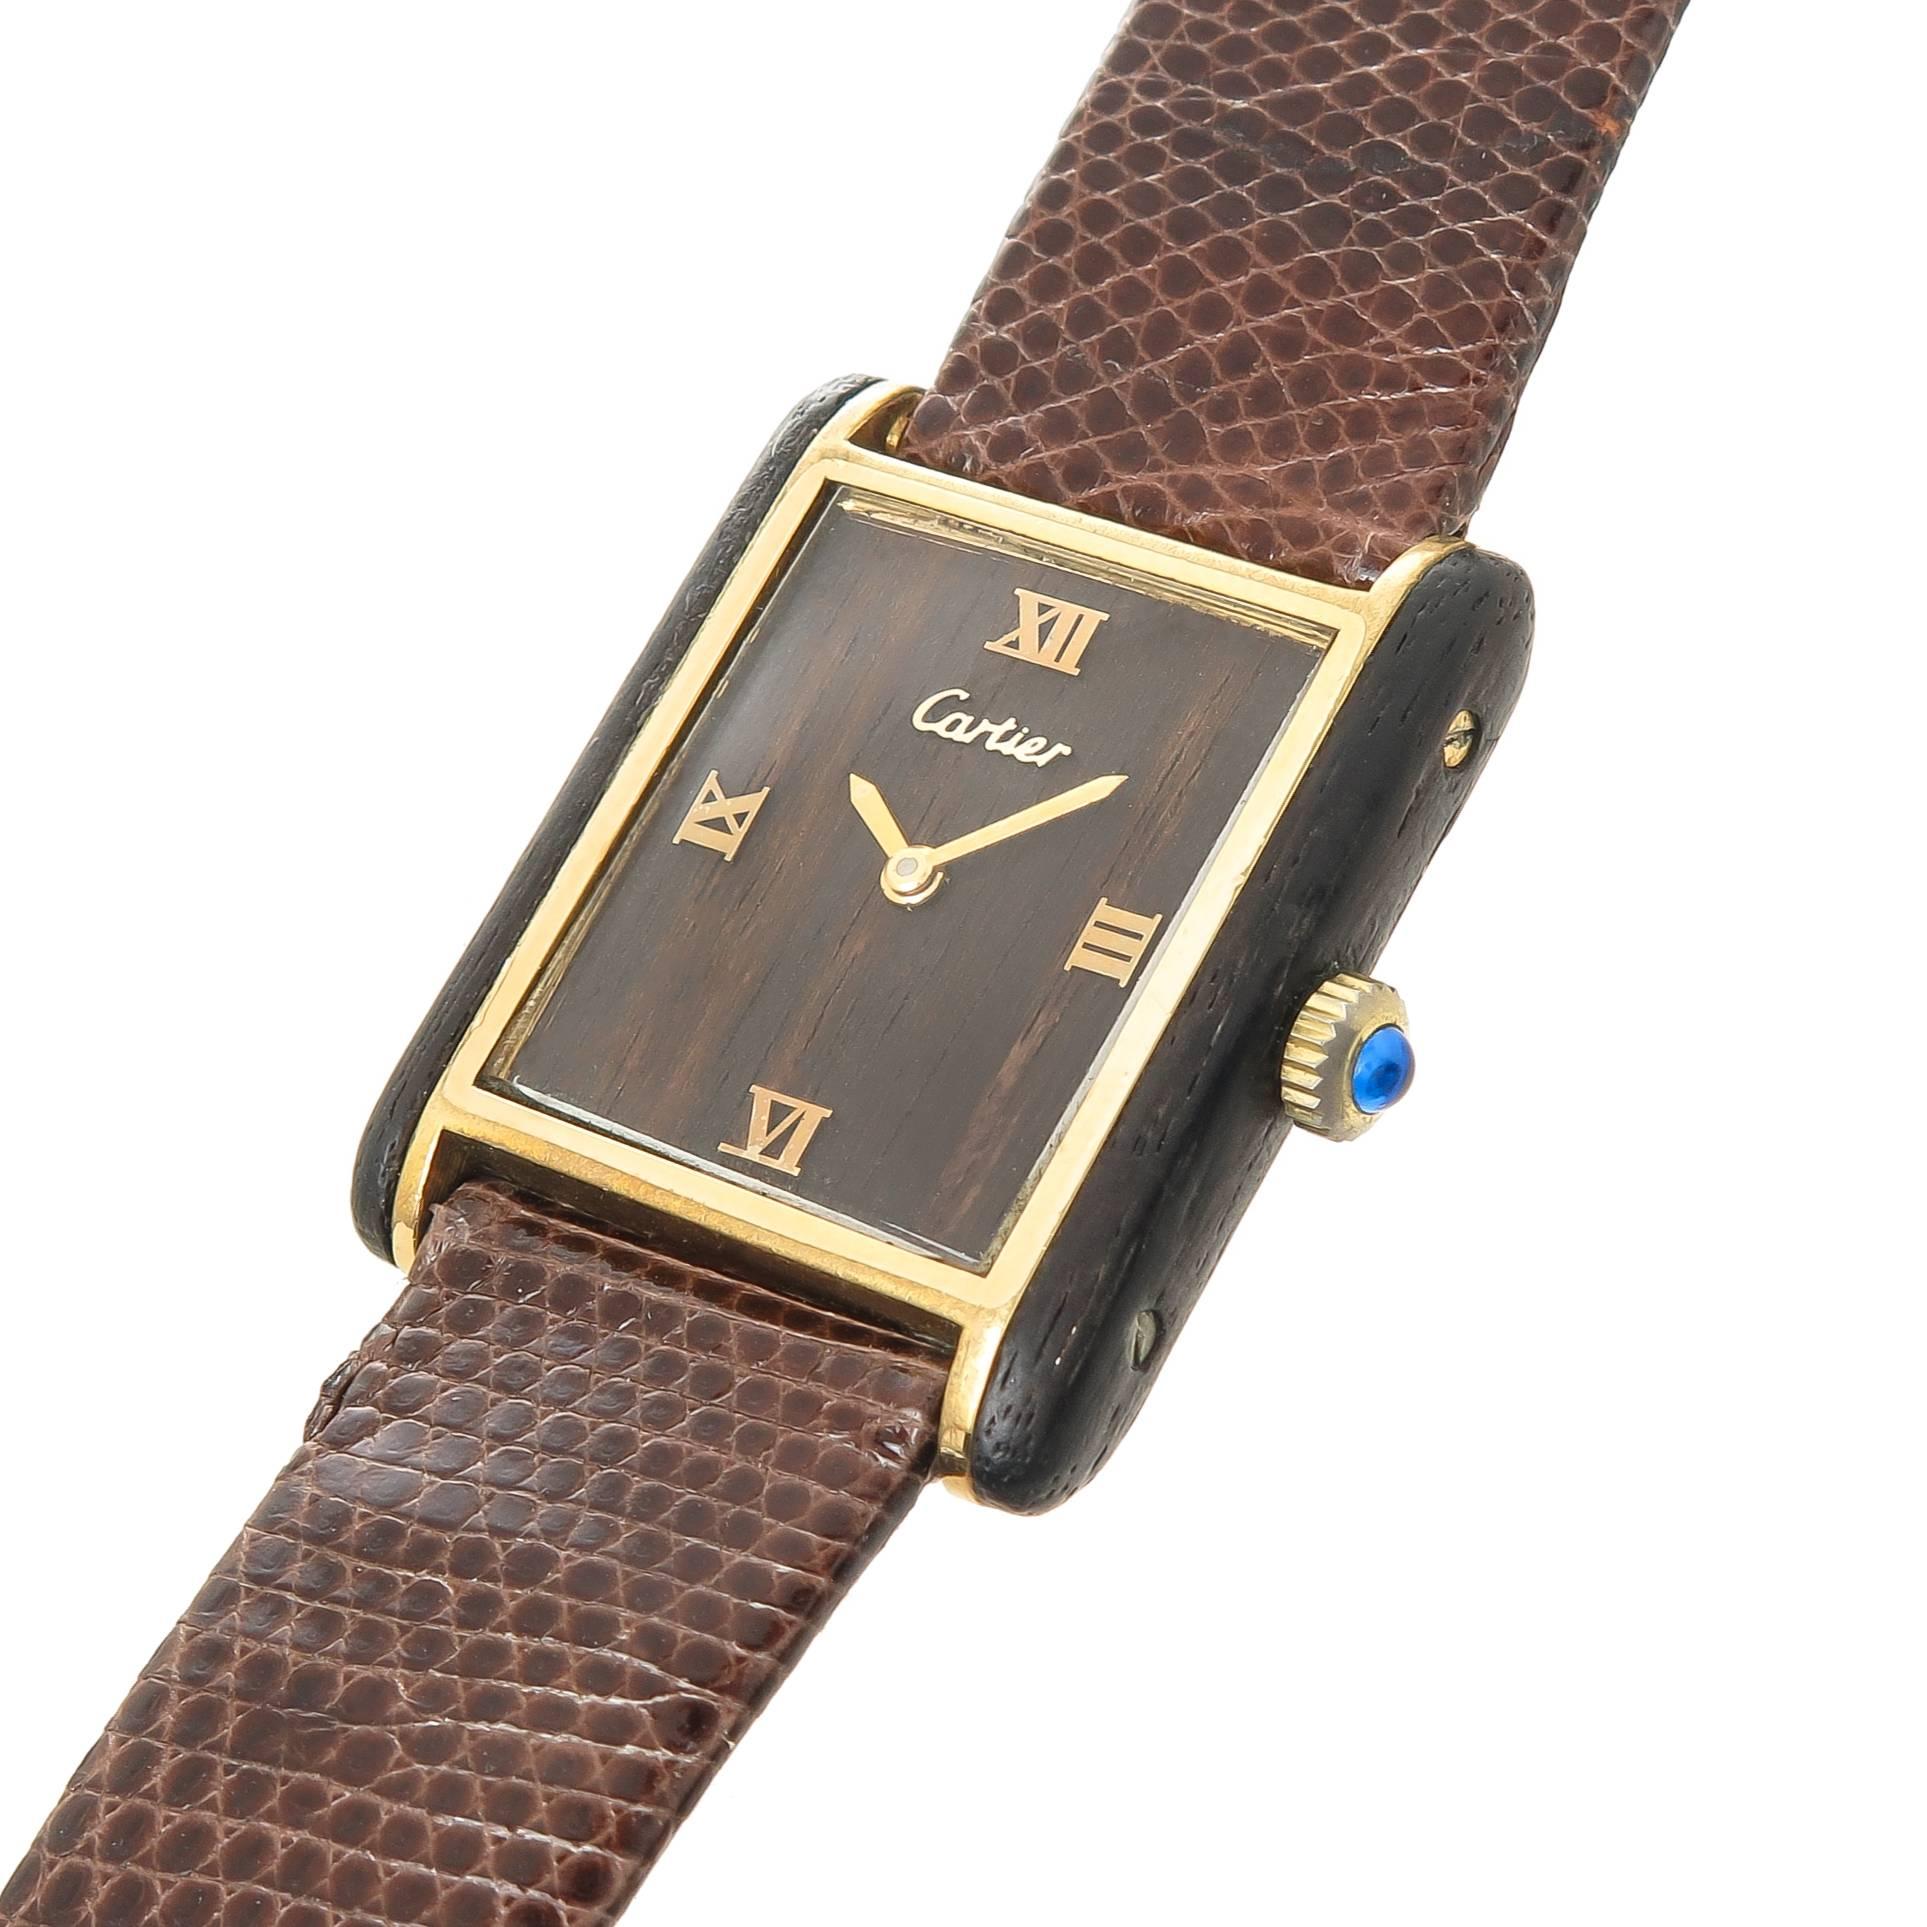 Circa 1970s Cartier Wood Tank Watch. 33 X 25 MM Gold Plate Case with Mahogany Wood Sides. 17 Jewel mechanical, Manual wind movement, Mahogany wood dial with raised Gold Markers. Sapphire Crown. New Brown Lizard strap with original Cartier Gold plate